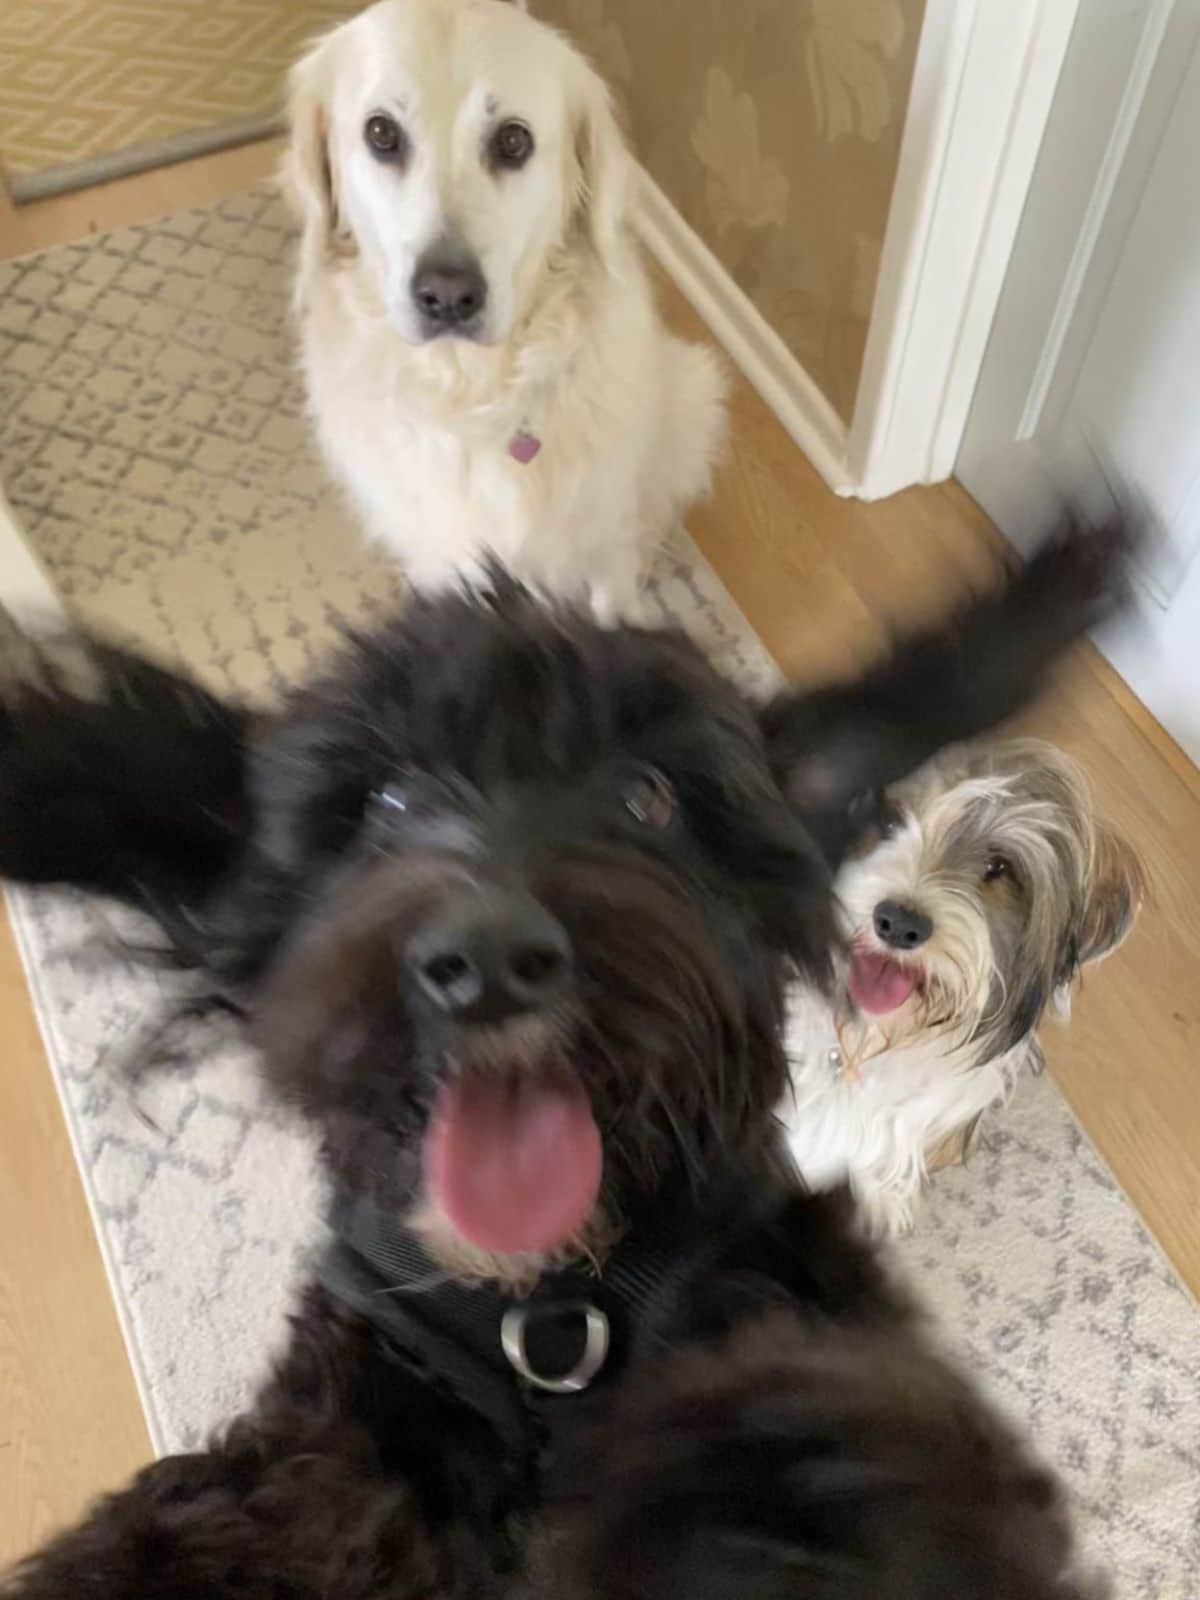 black fluffy dog jumping at the camera with a fluffy white dog and a fluffy black and white dog sitting on the floor